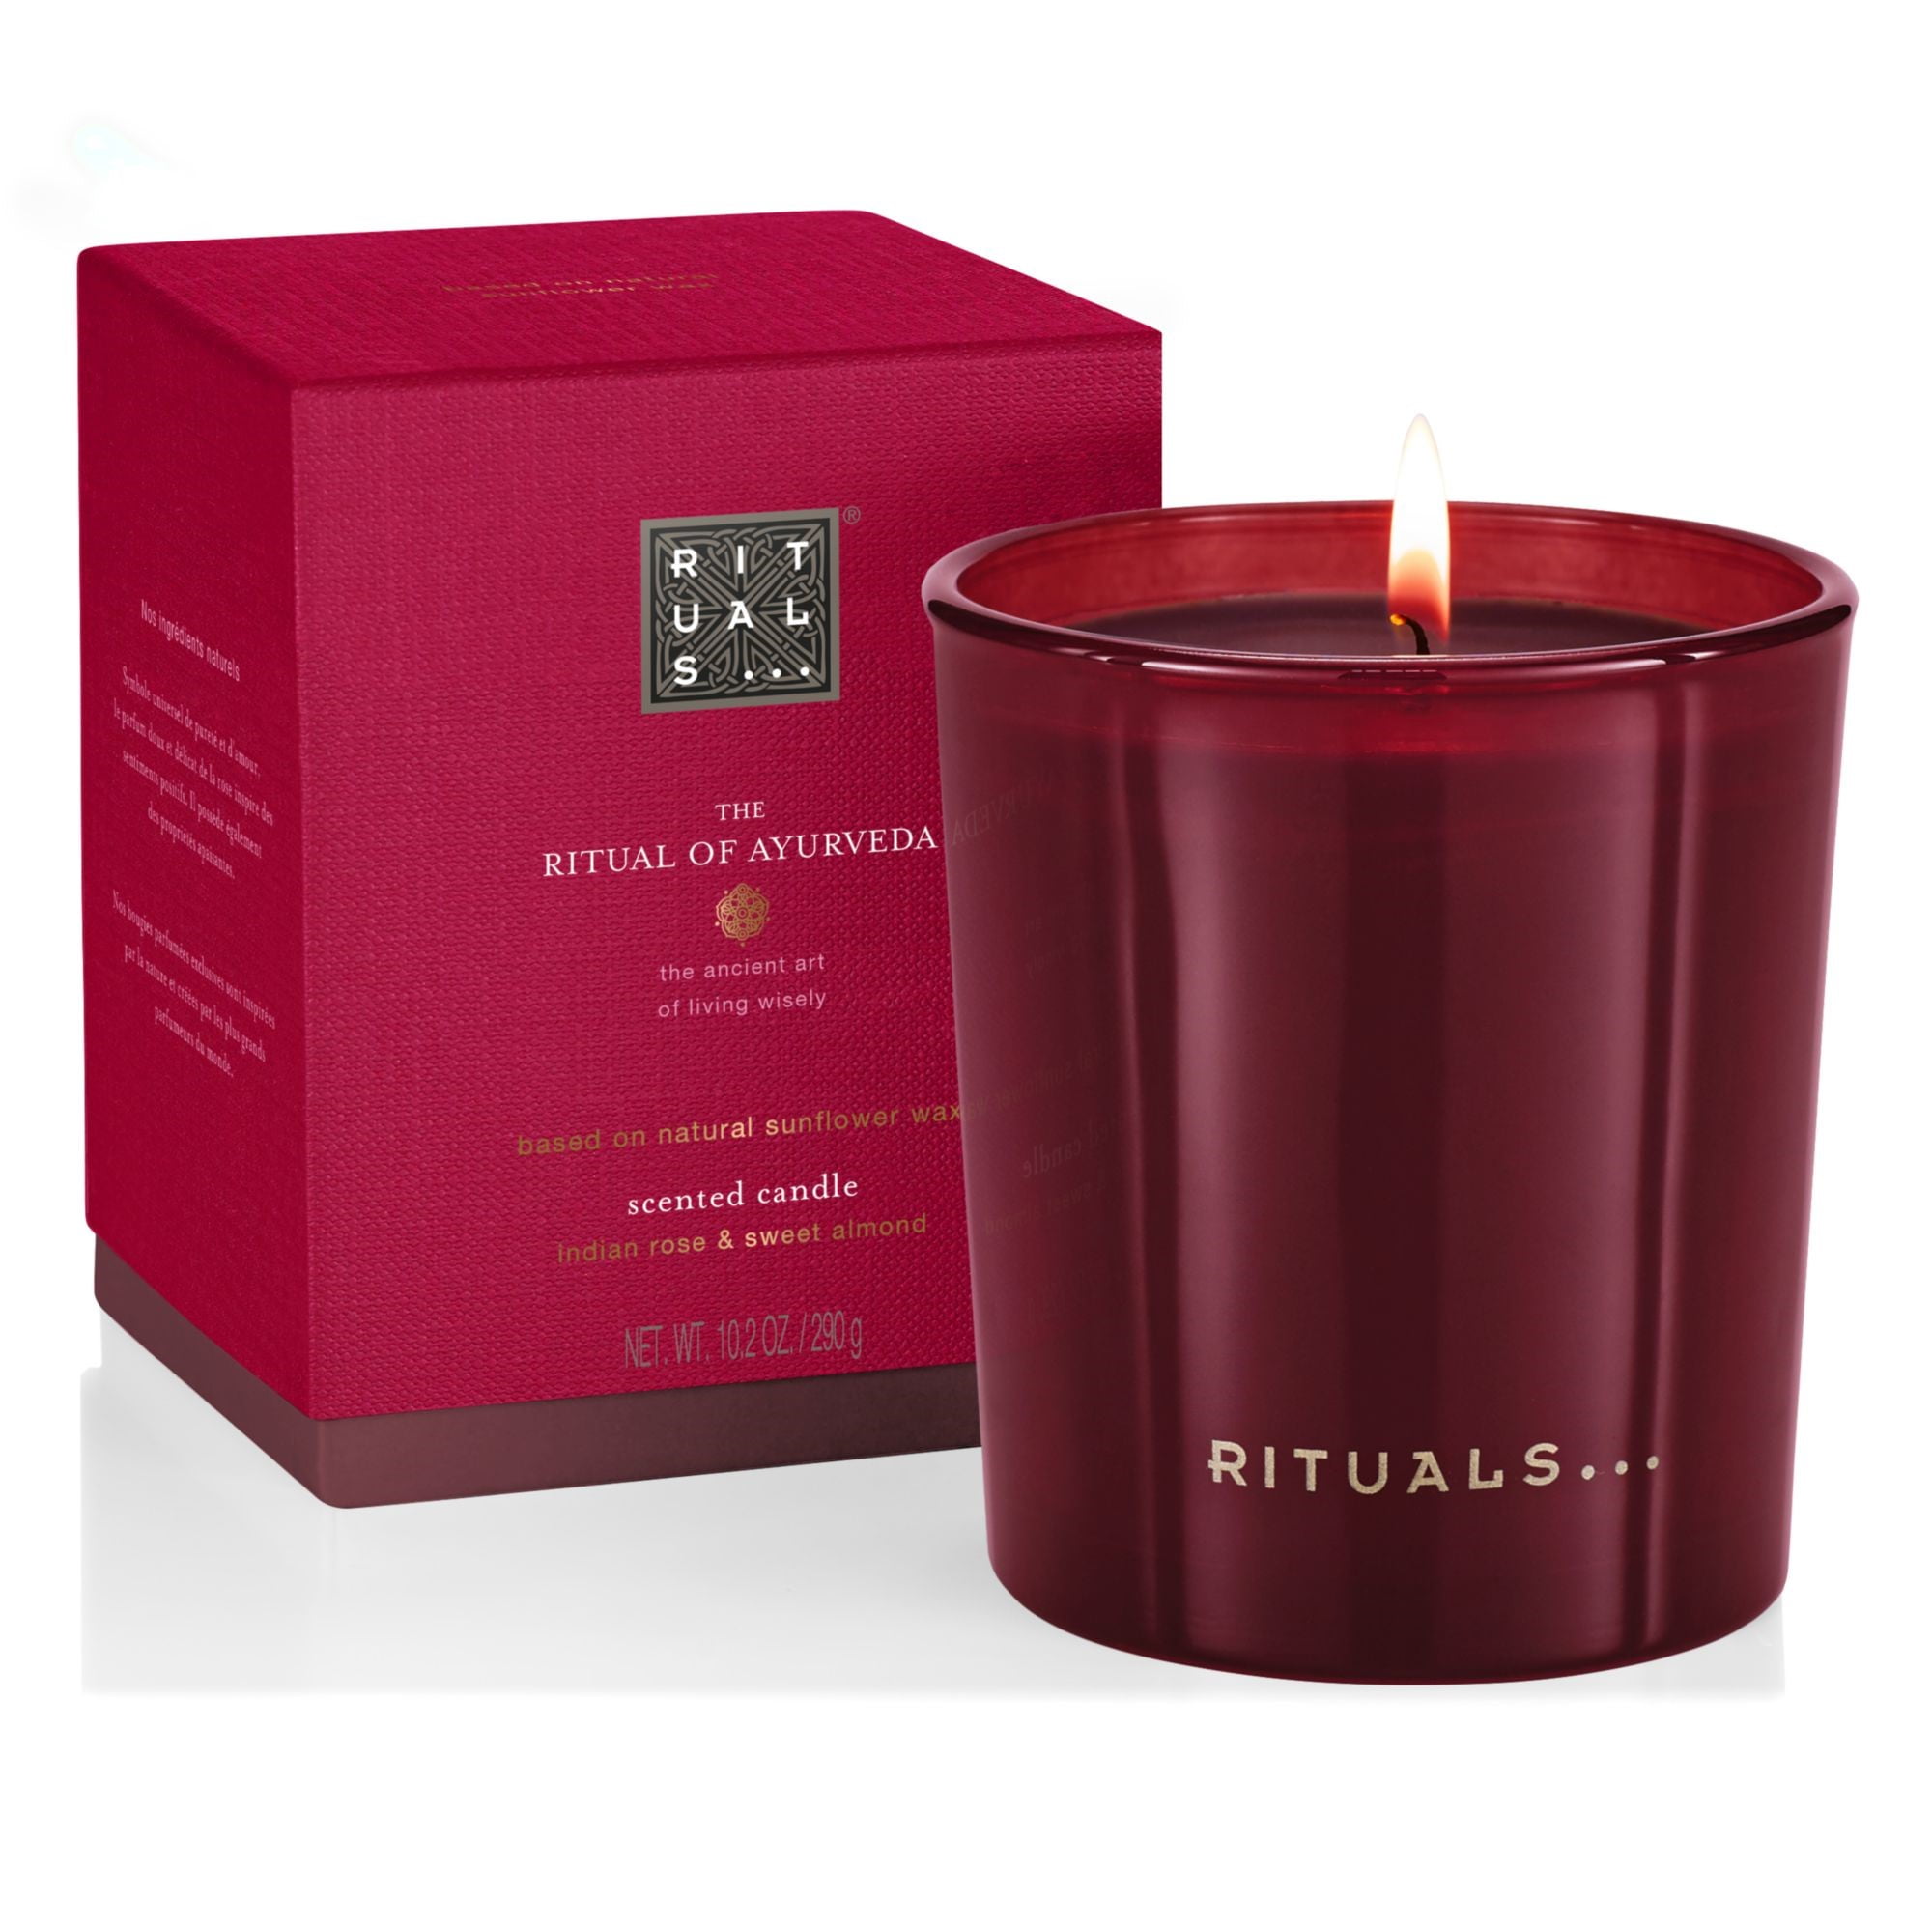 Rituals The Ritual of Ayurveda Scented Candle, 10.2 Oz 